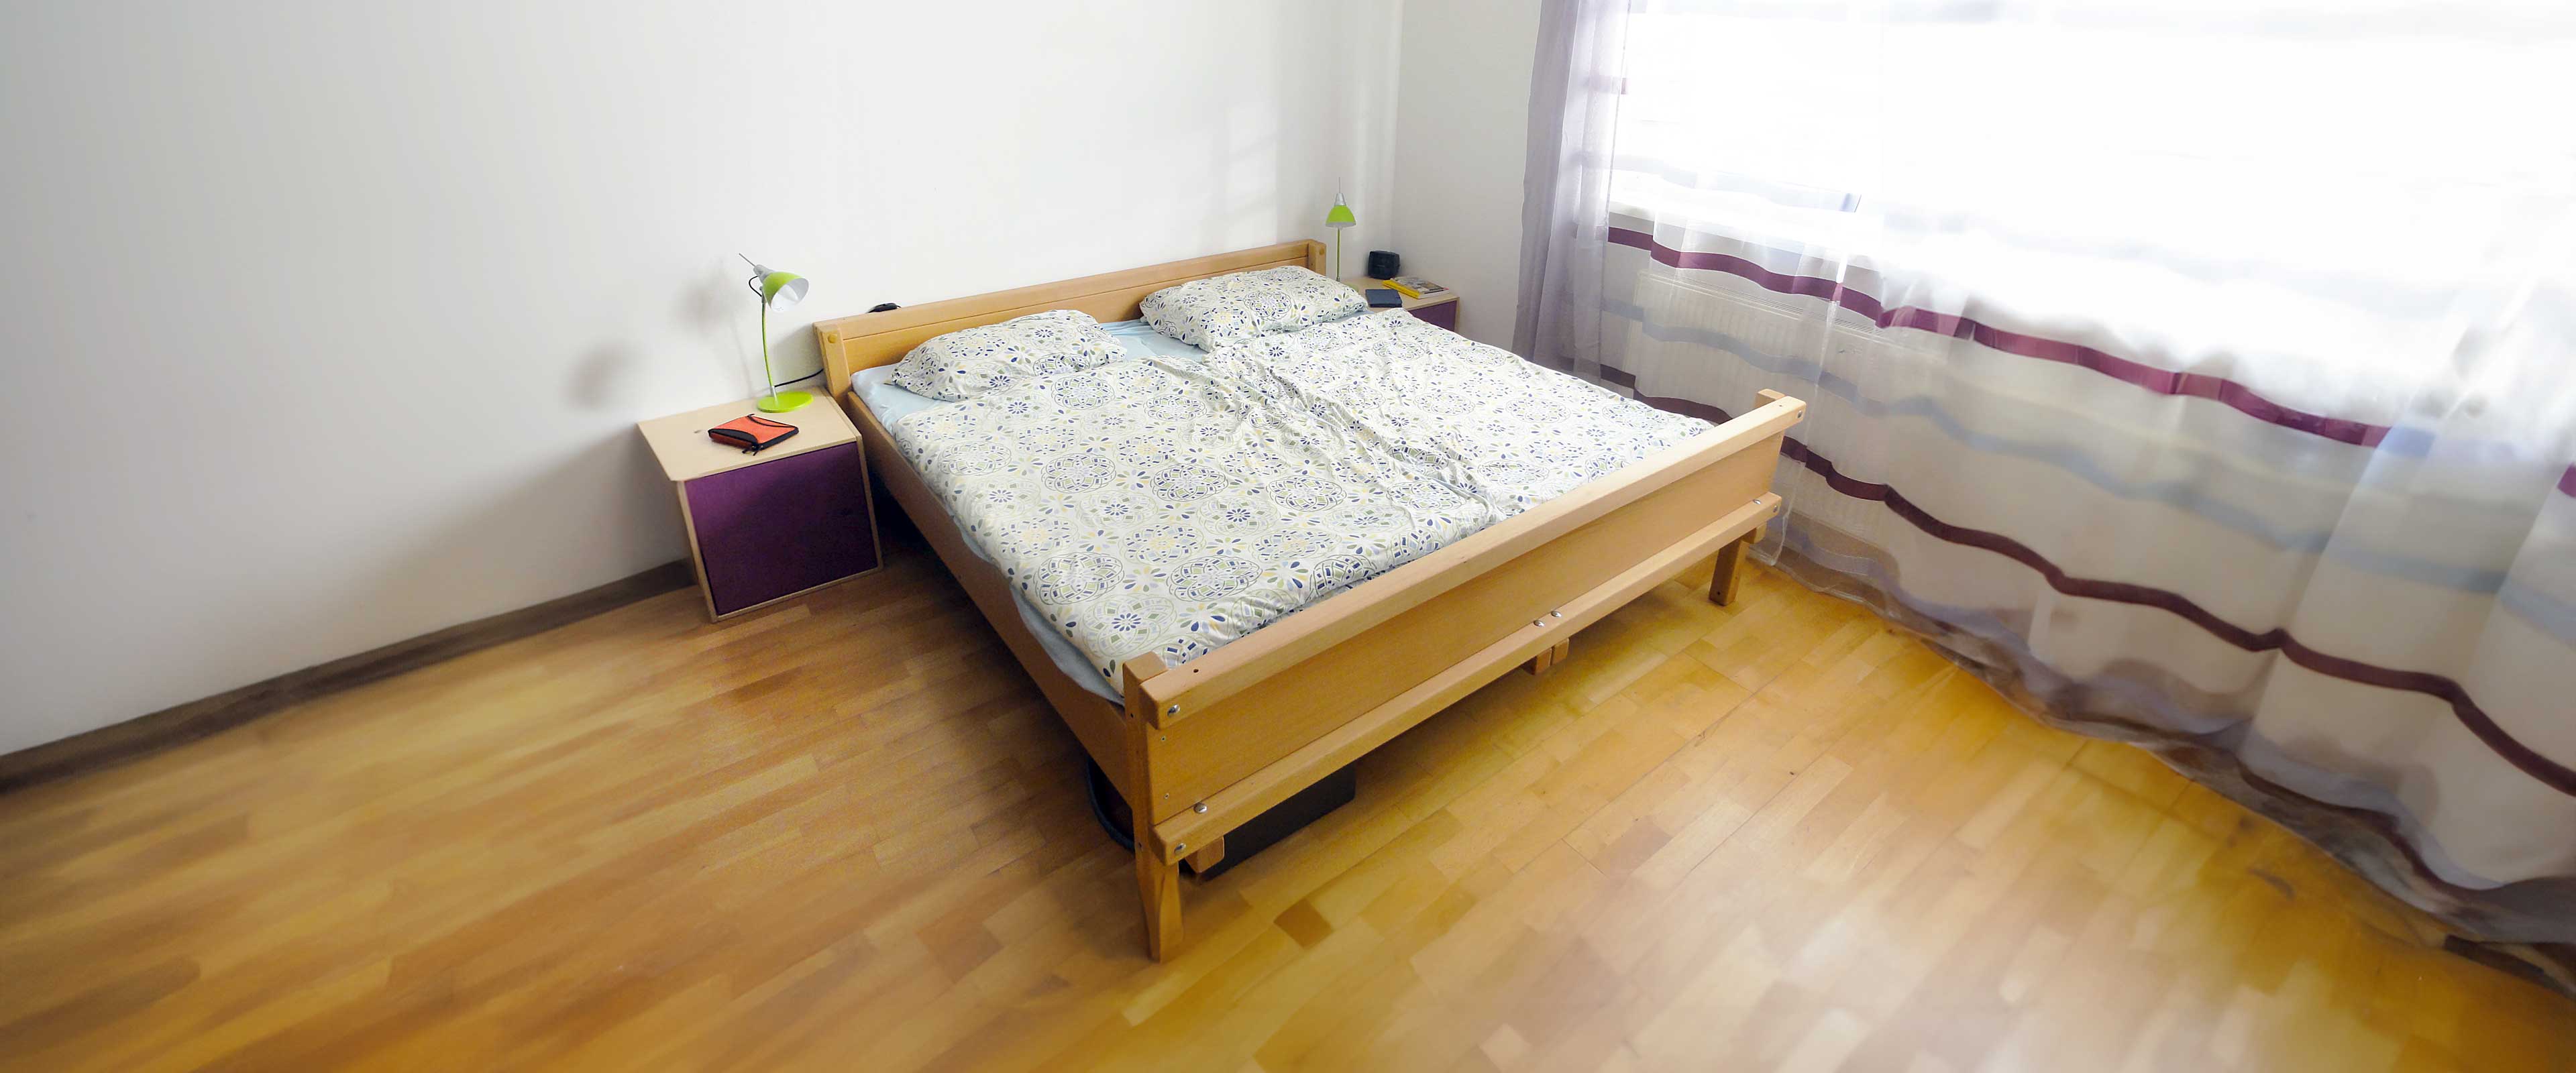 More beds for babies, toddlers, teens and adults